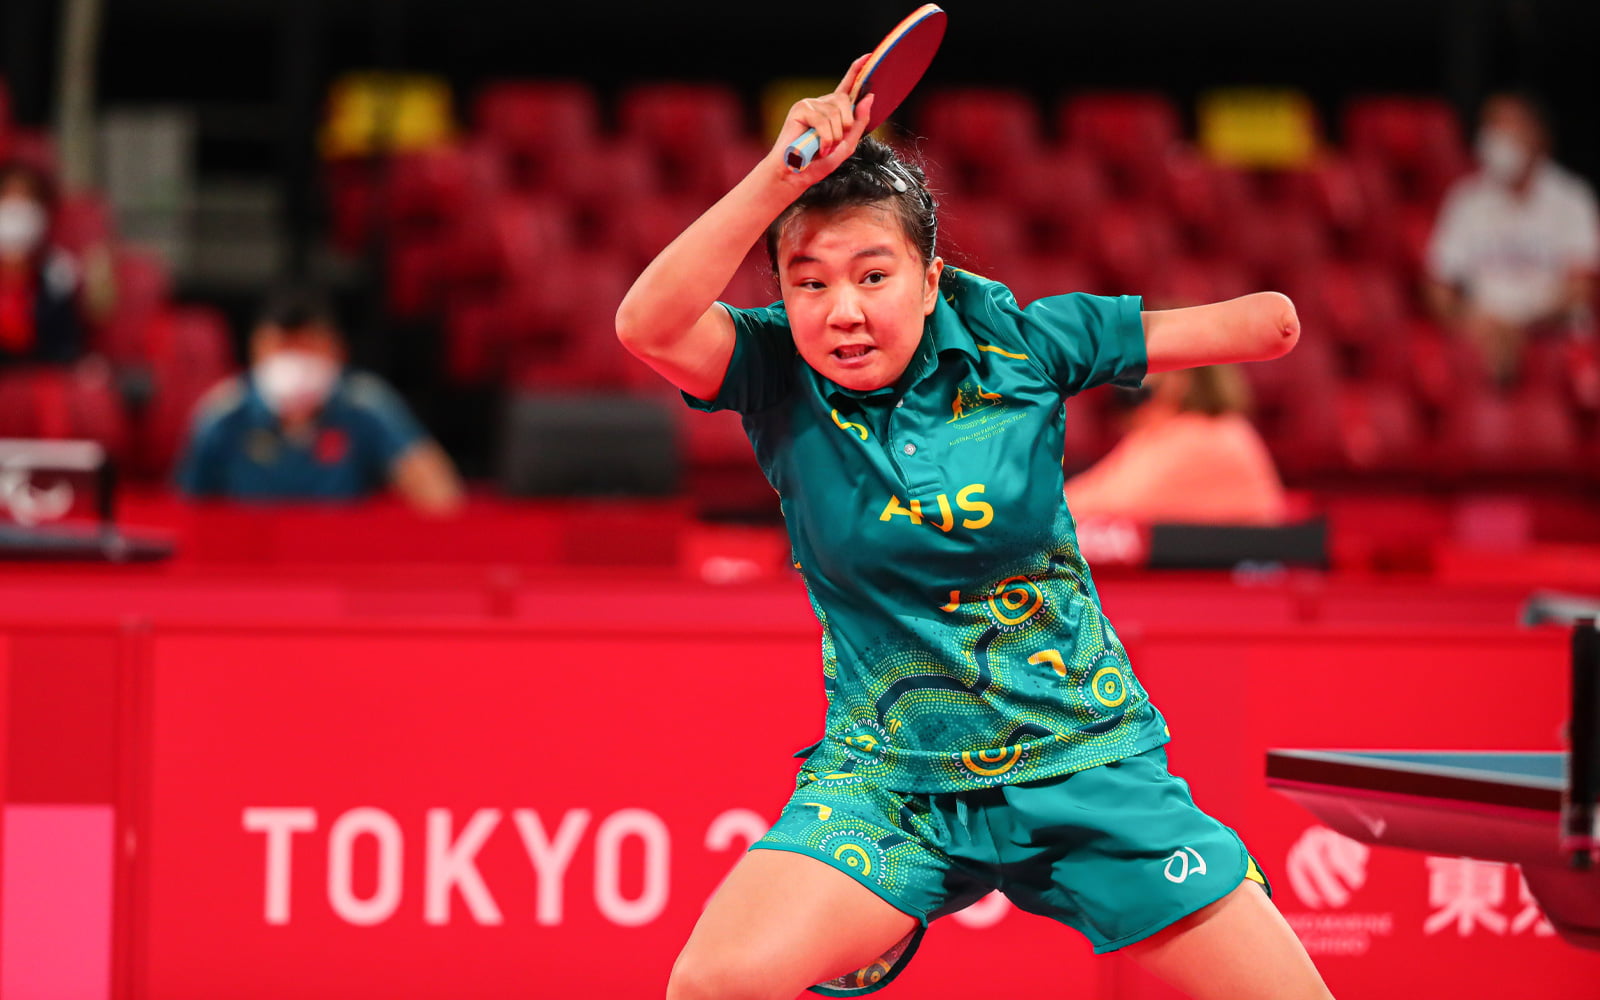 'She's Always Been My Goal': Qian Set For World Championship Showdown With All-Time Great